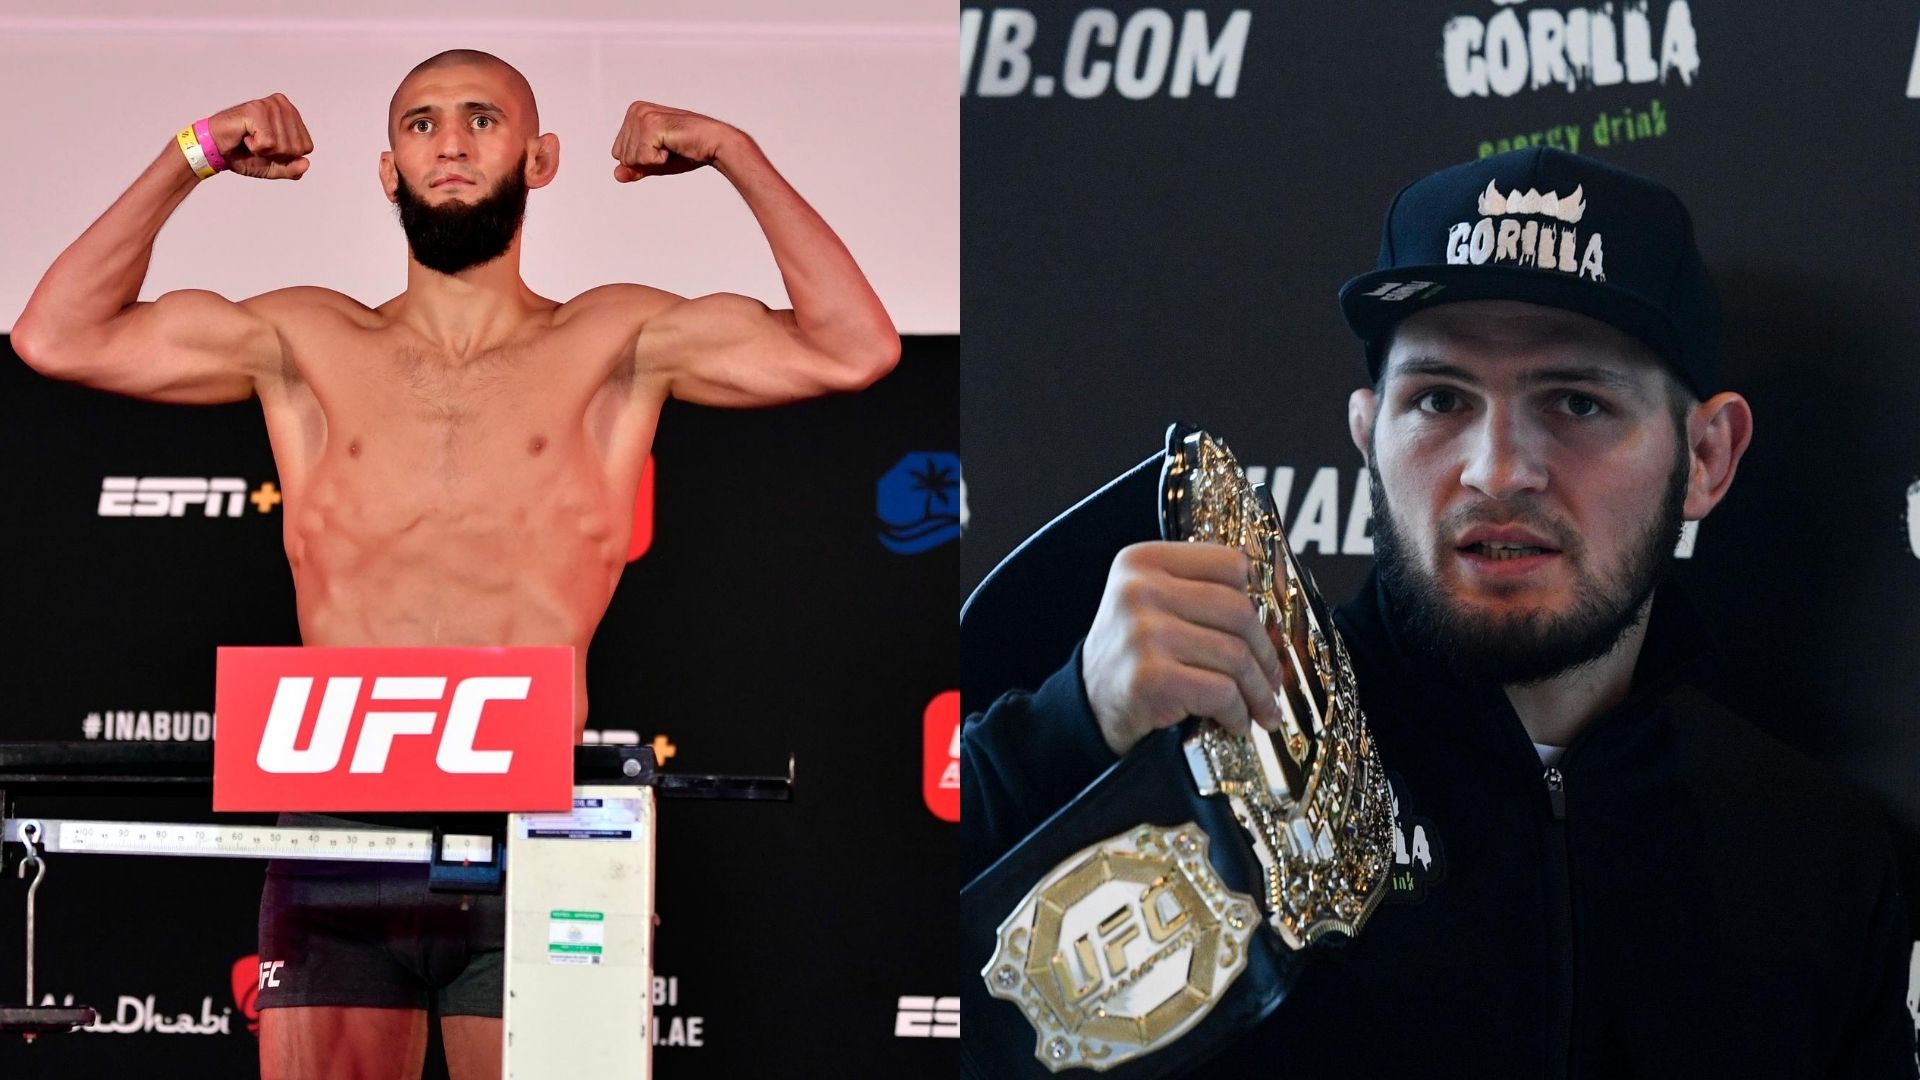 Khamzat Chimaev came from Chechnya before moving to Sweden and Khabib Nurmagomedov has backed him to be a star